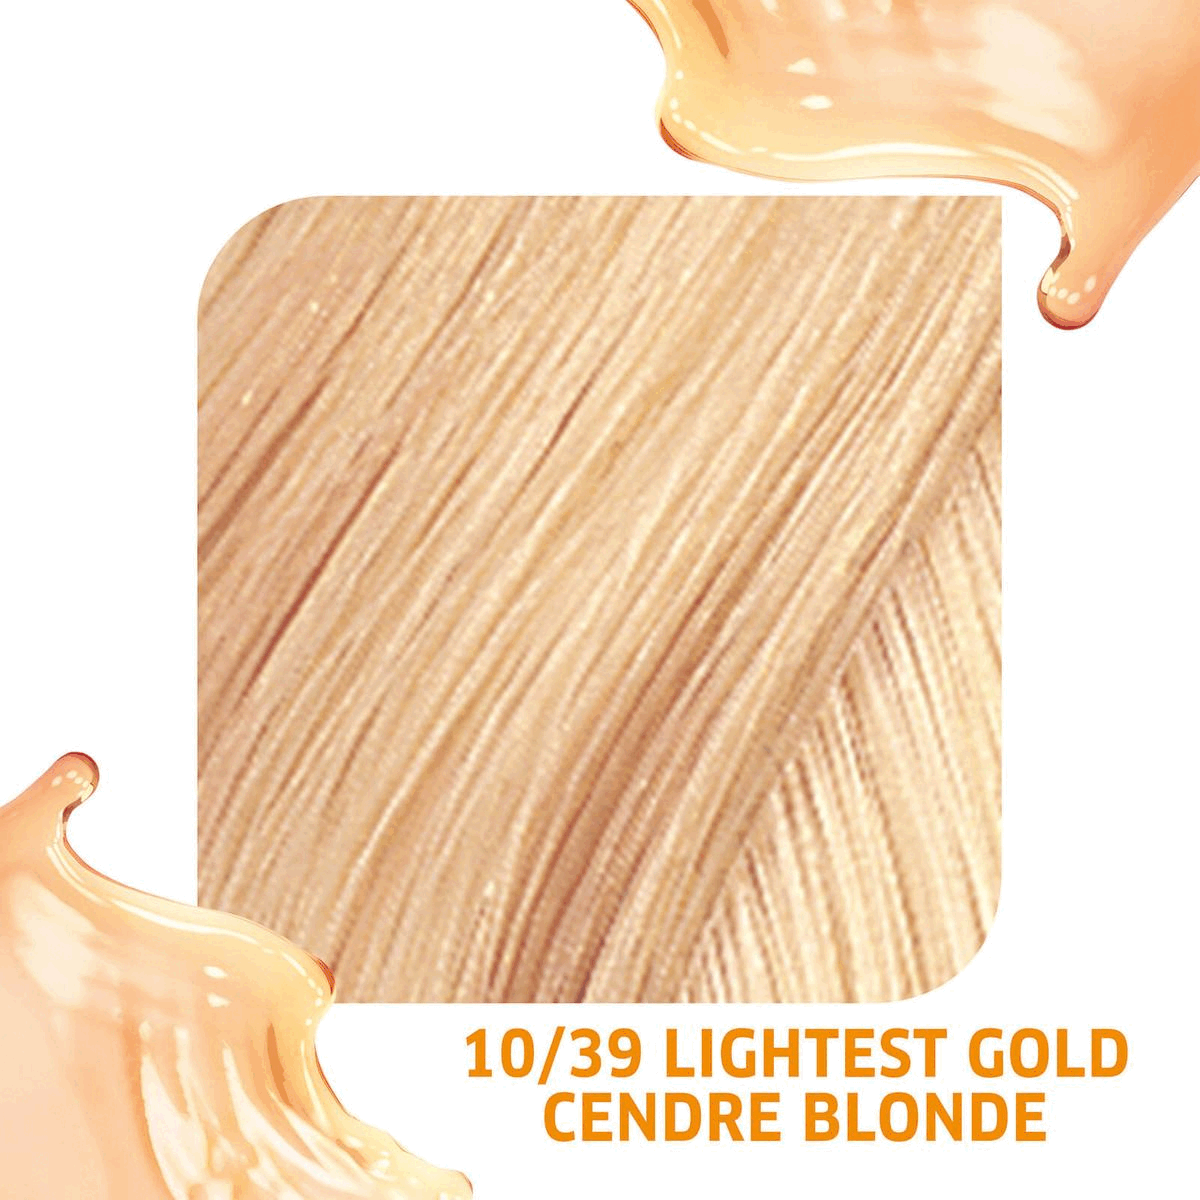 Image 1, 10/39 Lightest Gold Cendre Blonde  Semi-Permenant Colour enhance . Image 2, 10/39 Lightest Gold Cendre Blonde  Semi-Permenant Colour enhance . Image 3, 10/39 Lightest Gold Cendre Blonde  Semi-Permenant Colour enhance. Direct Dies and Vitamin Care Complex. Image 5, Lasts Up to 10 Shampoos Image 6,Colour, depth and tone. Image 6, Quick and Easy Application